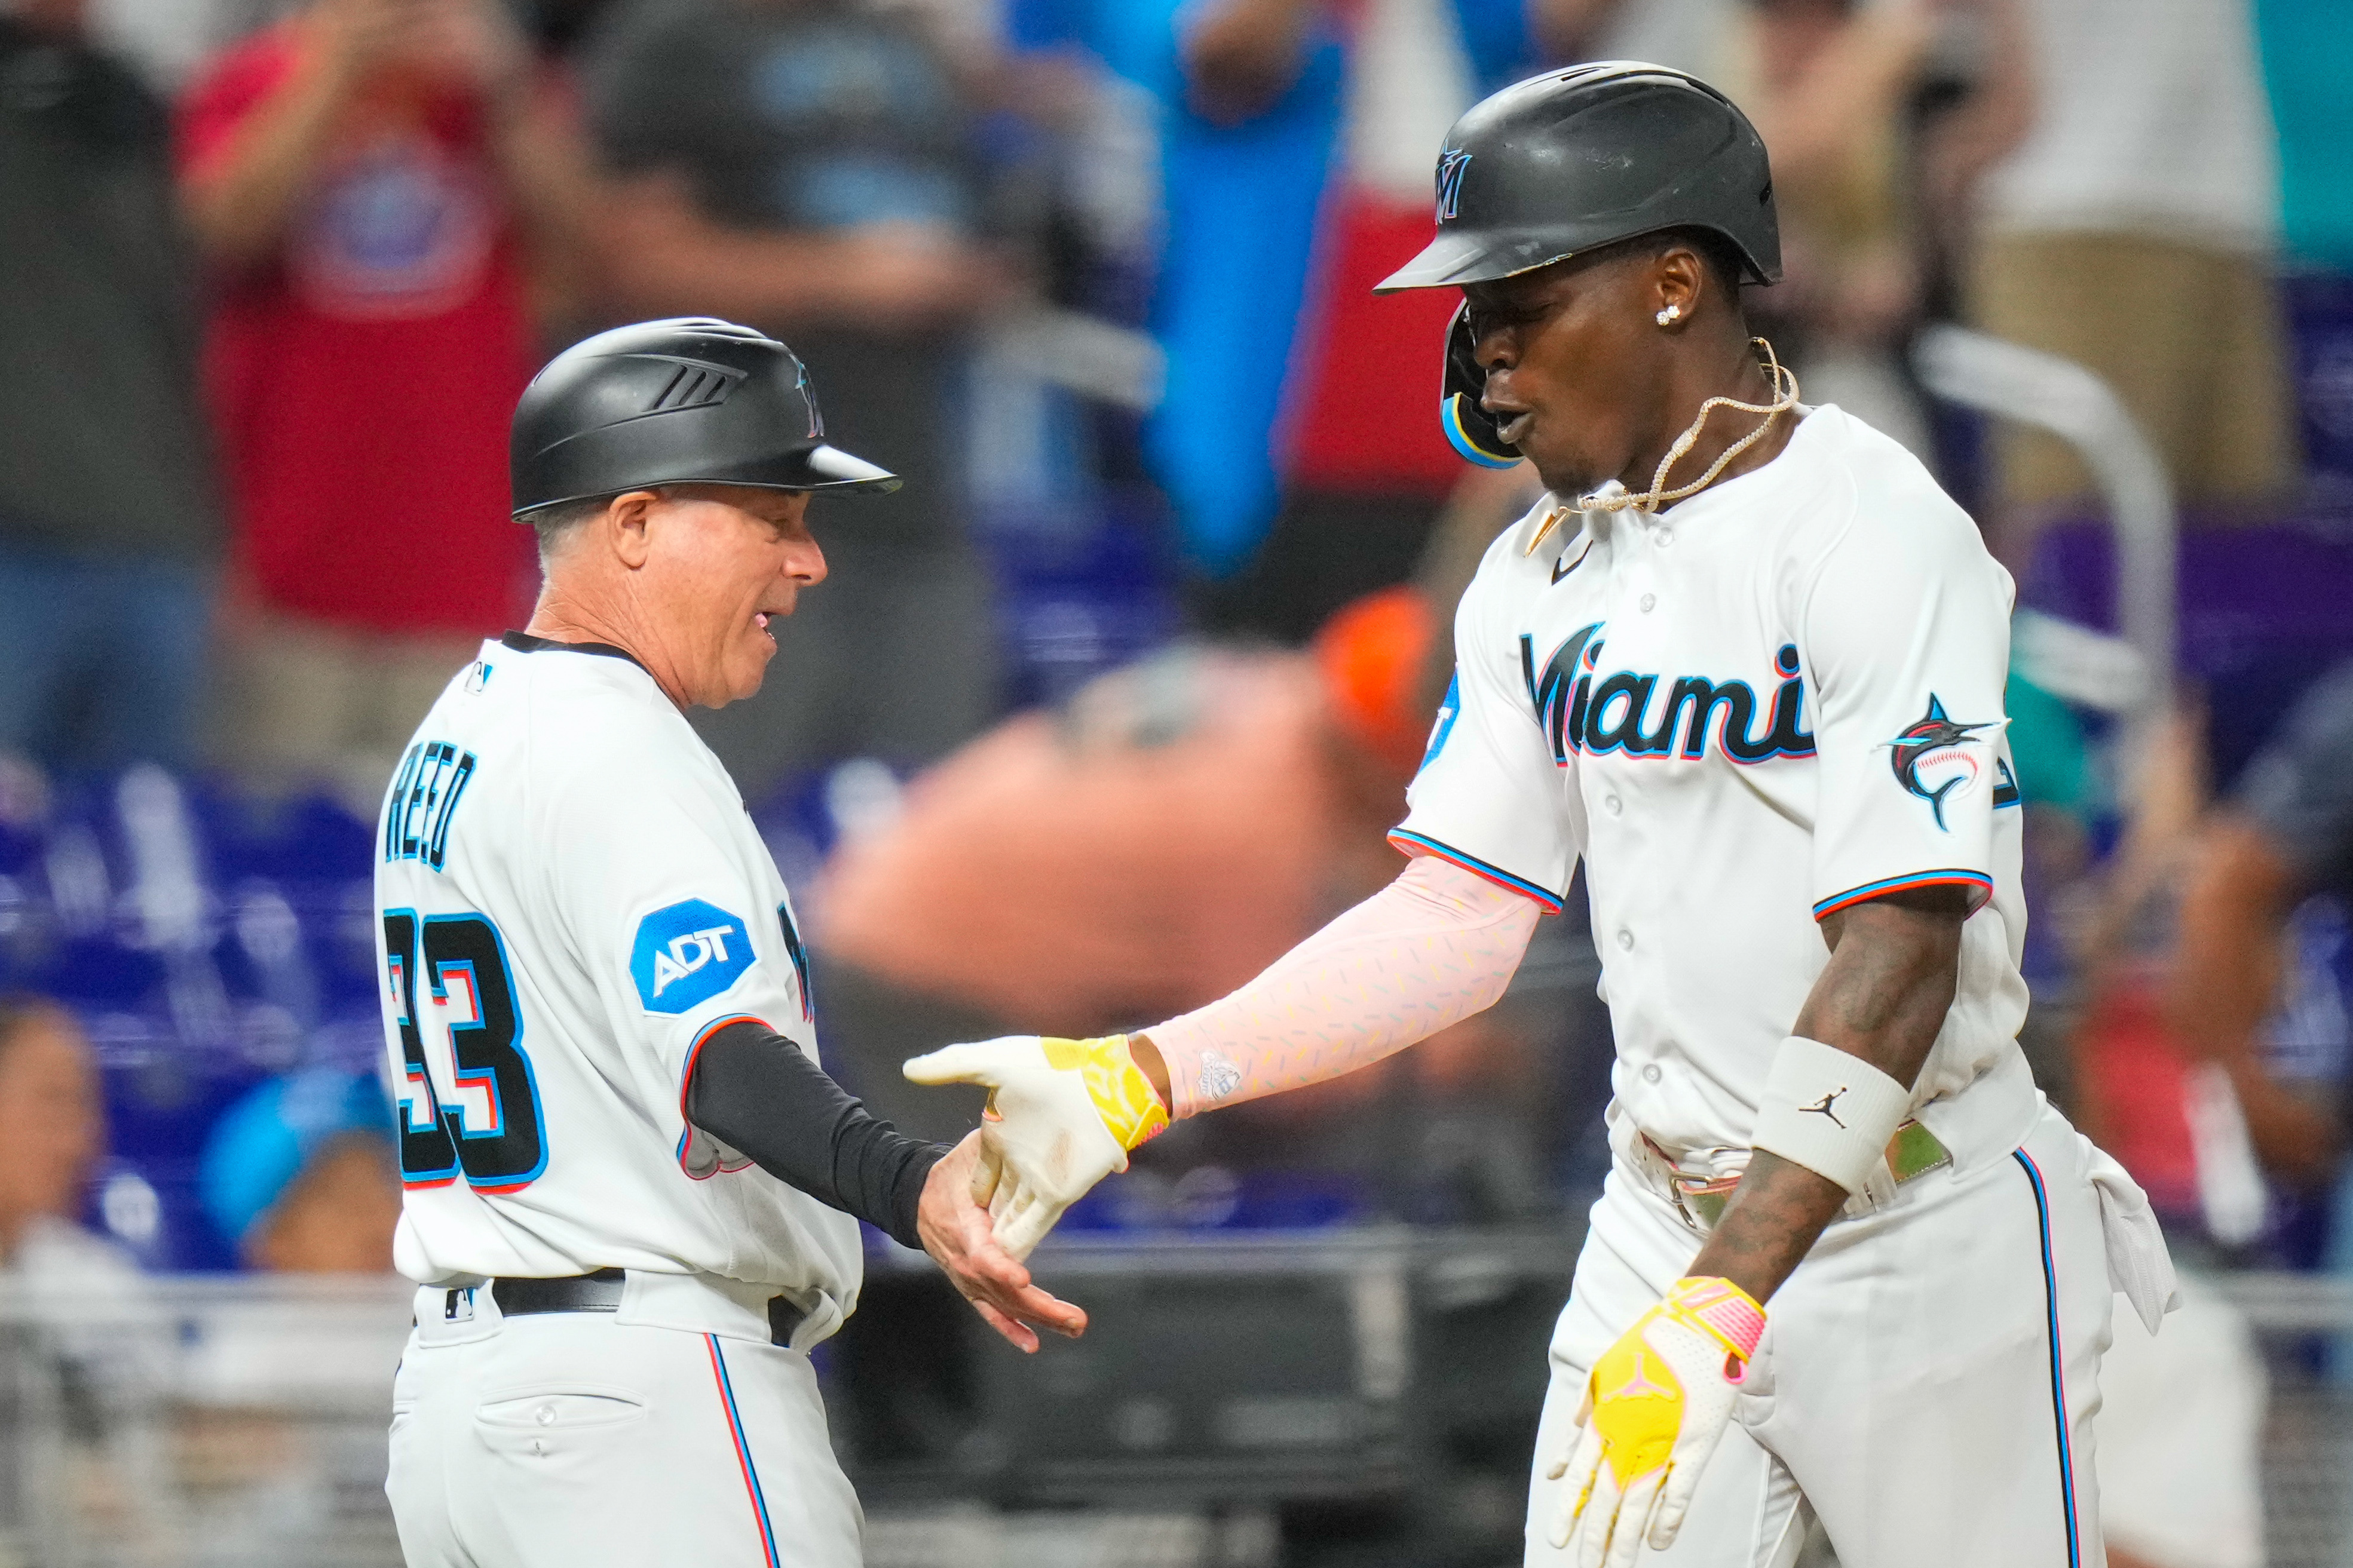 Miami's nine-run fifth inning powers Marlins past Dodgers